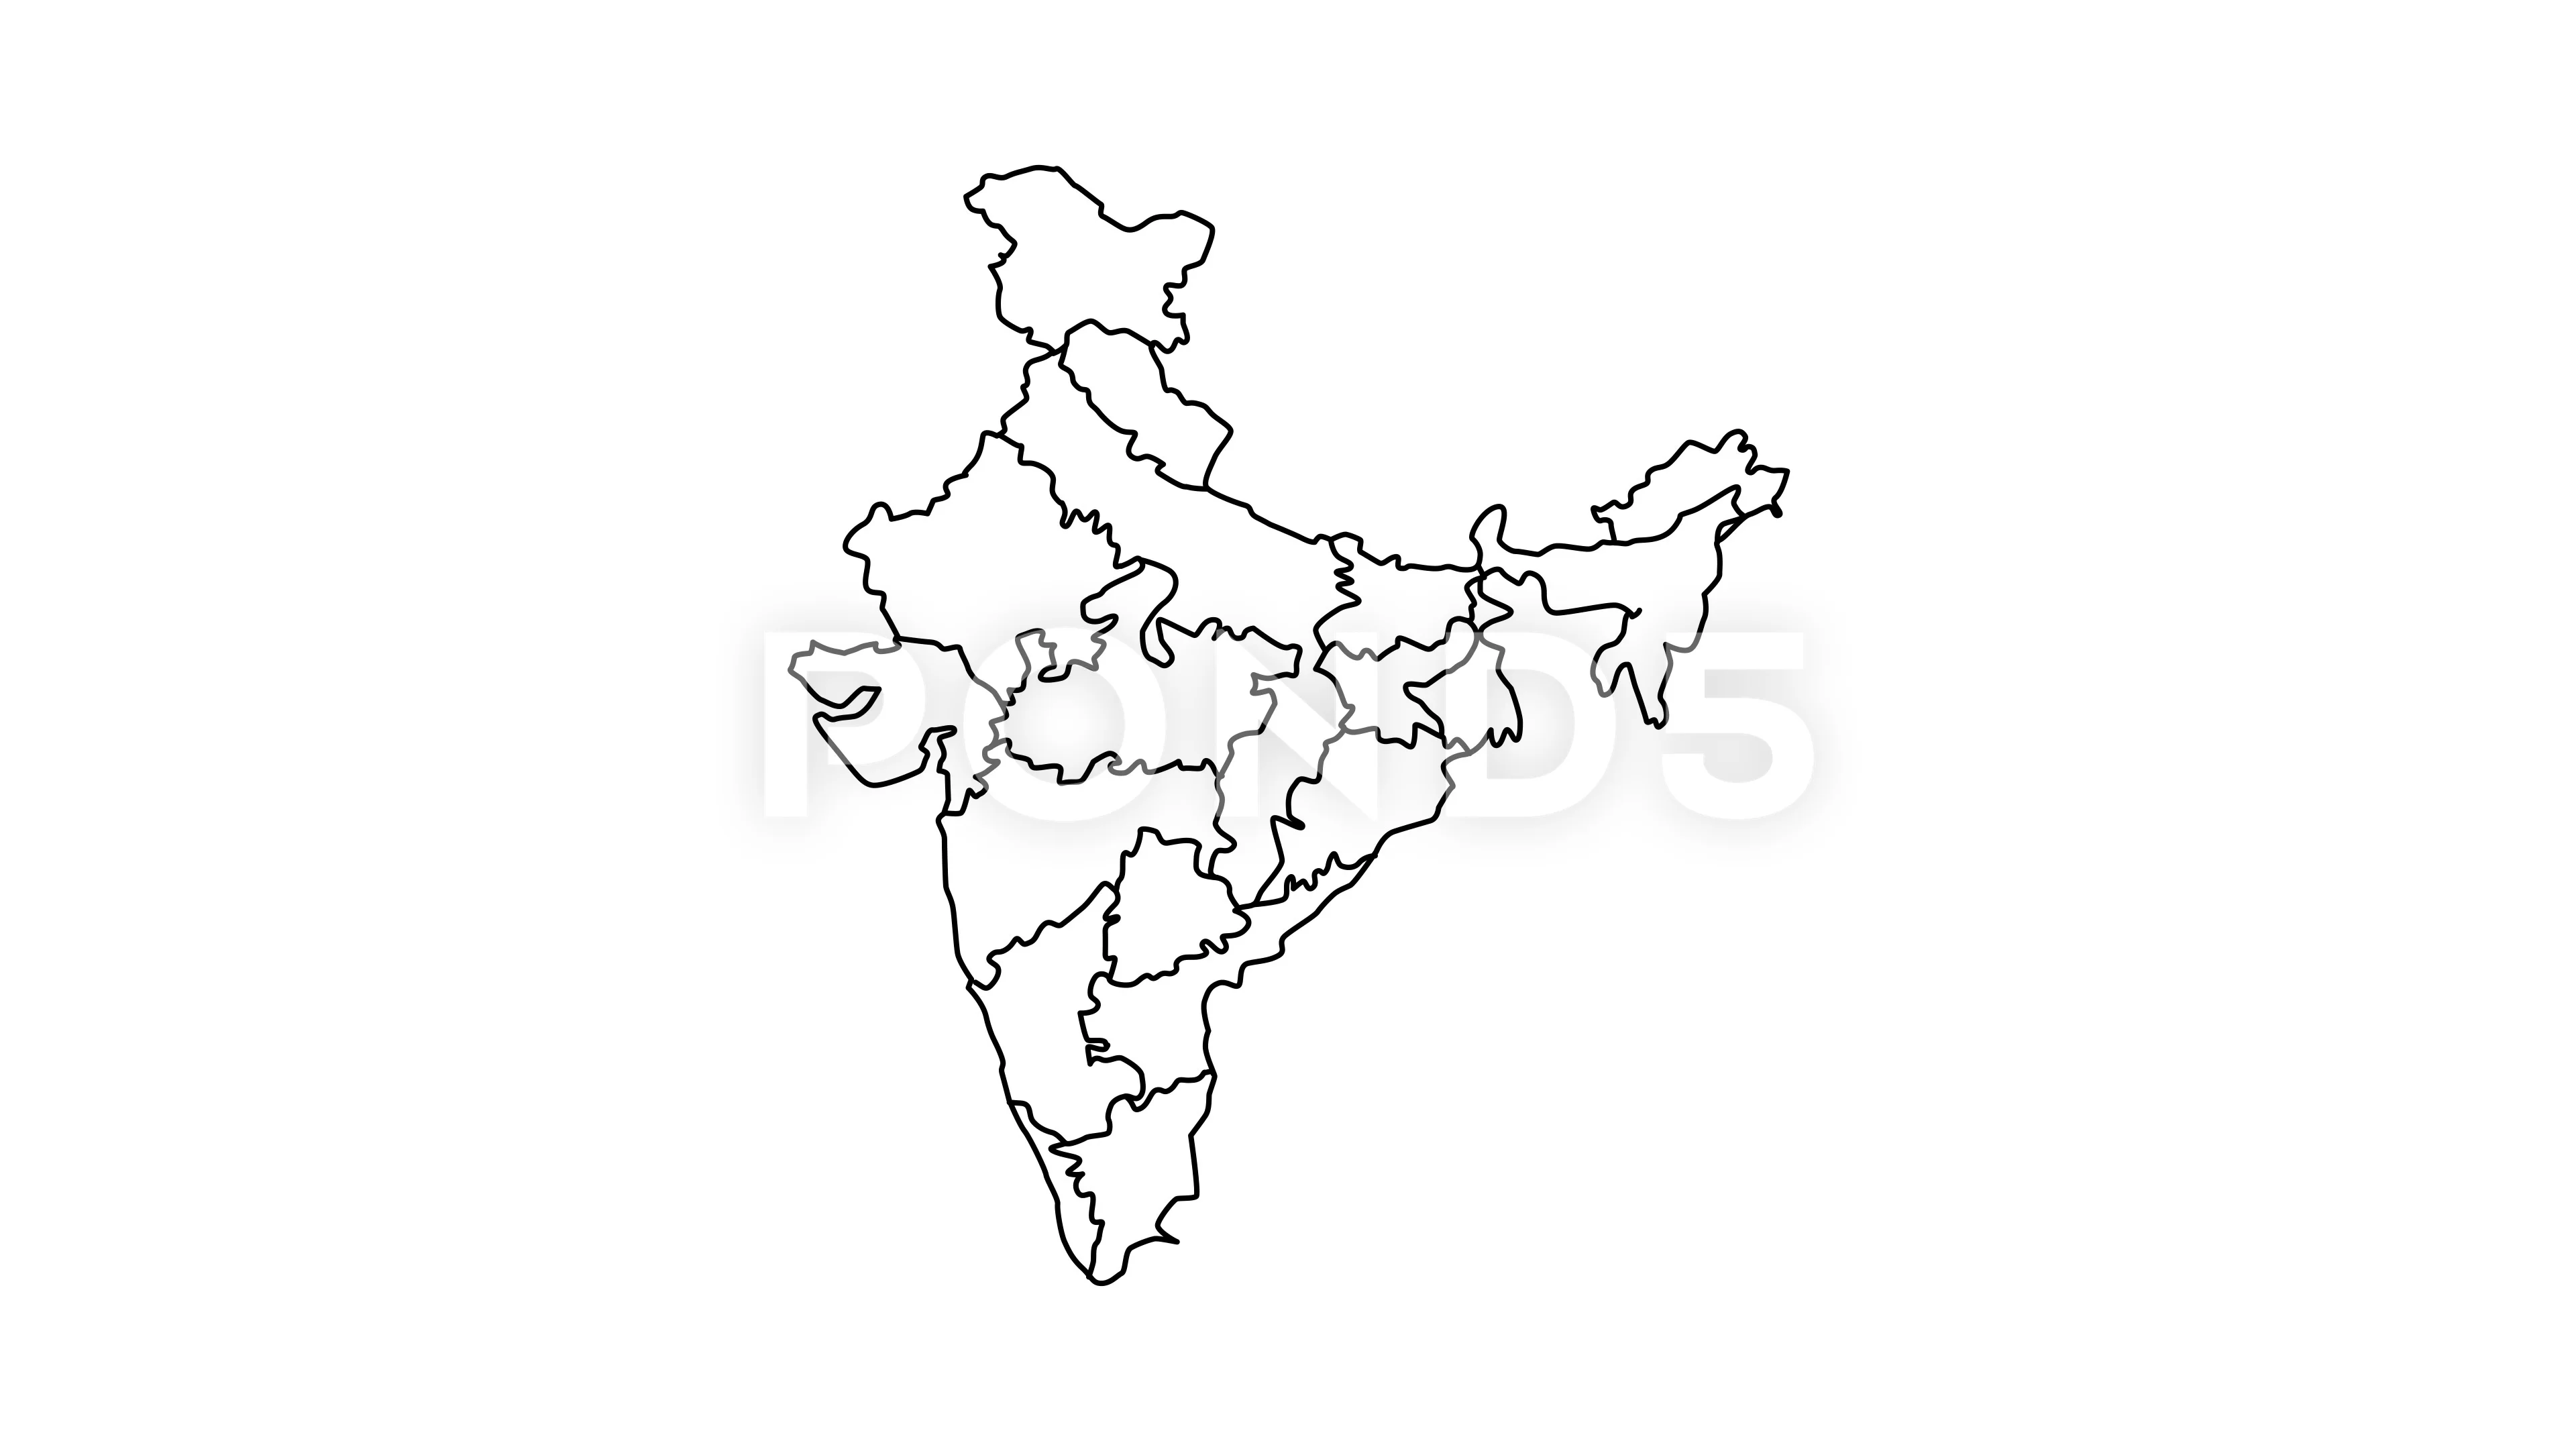 Doodle freehand drawing of India map. - Stock Illustration [91197502] -  PIXTA